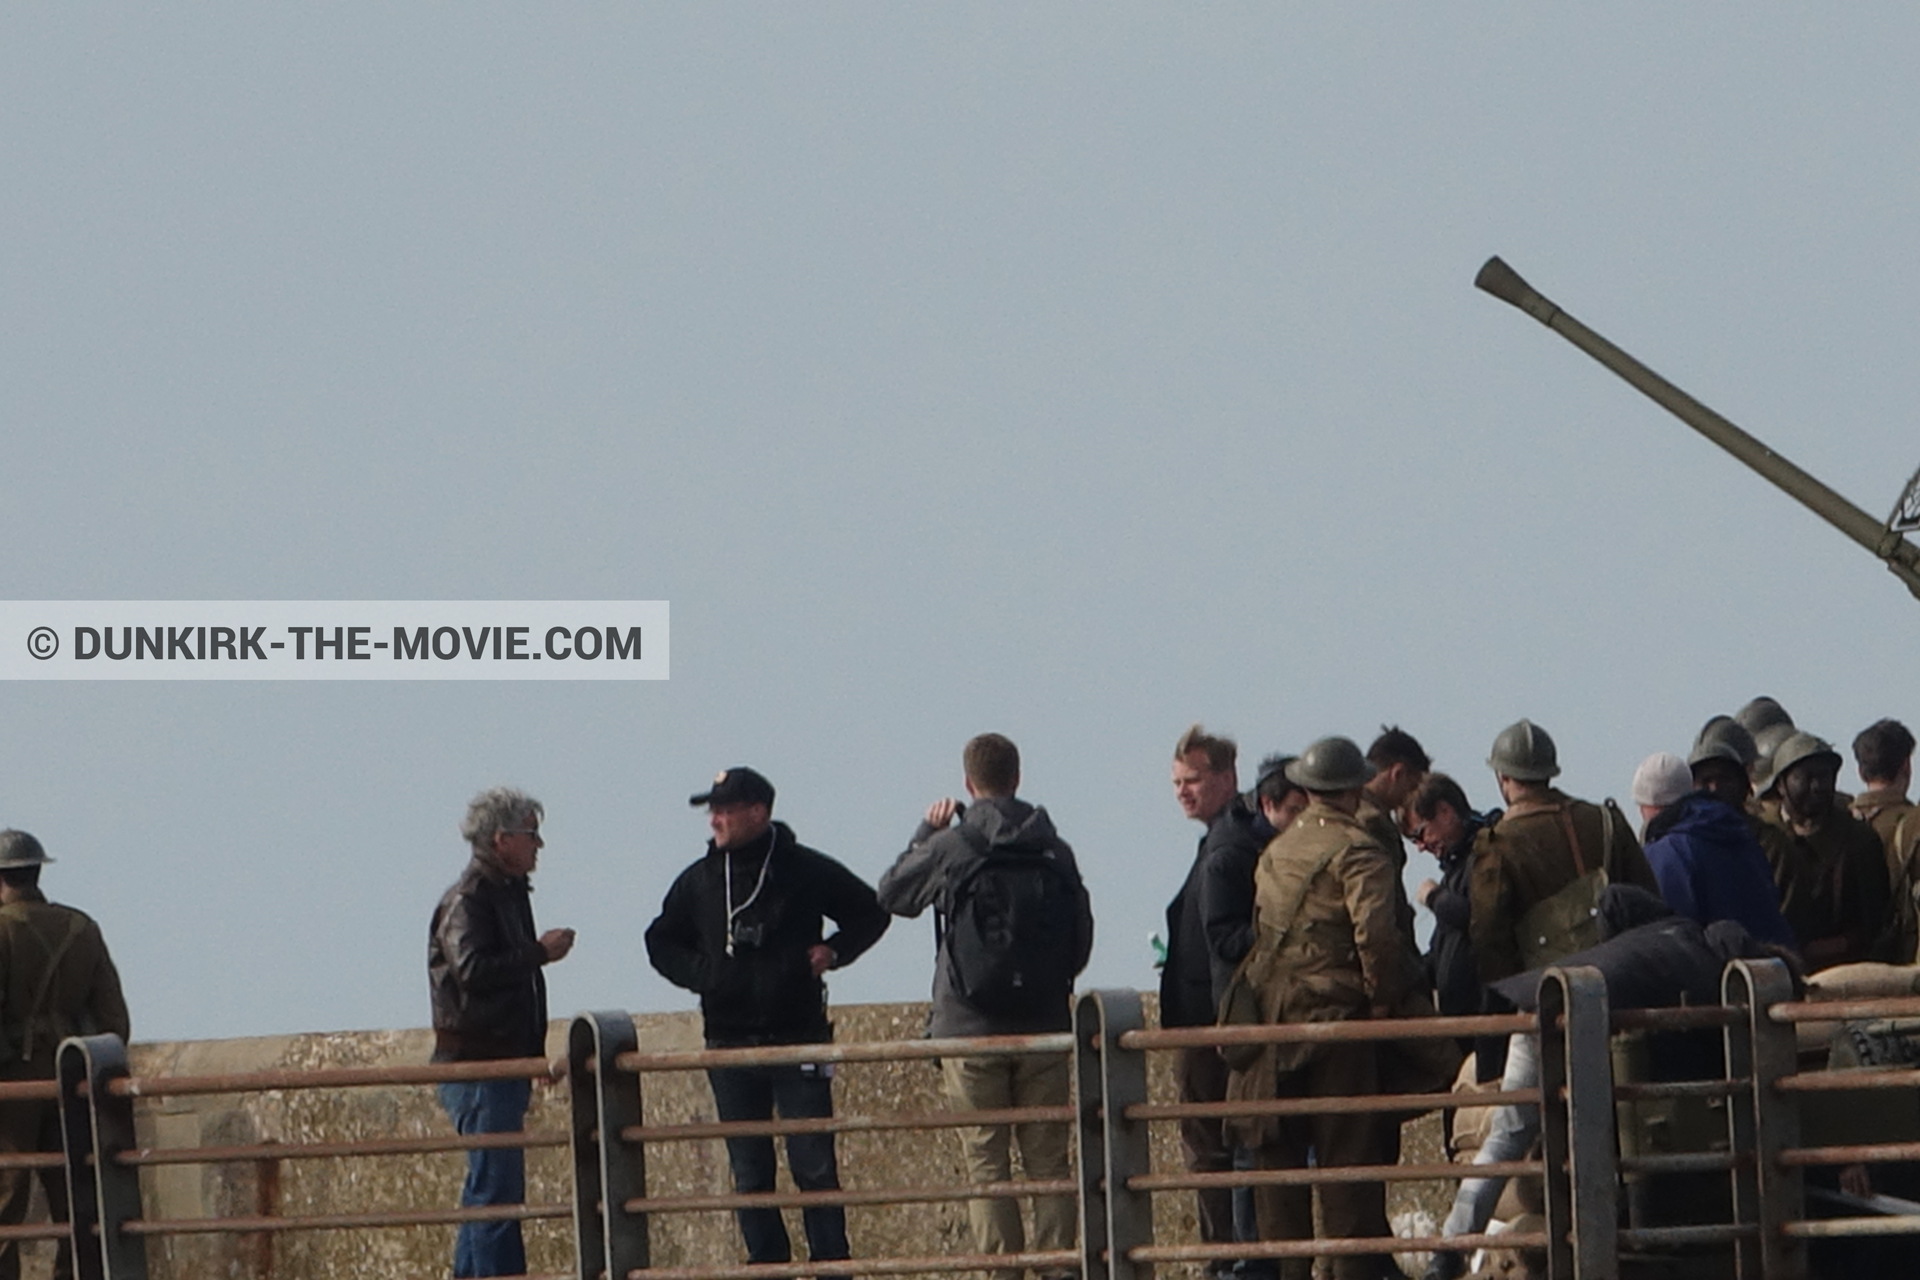 Picture with cannon, supernumeraries, EST pier, Christopher Nolan, Nilo Otero,  from behind the scene of the Dunkirk movie by Nolan